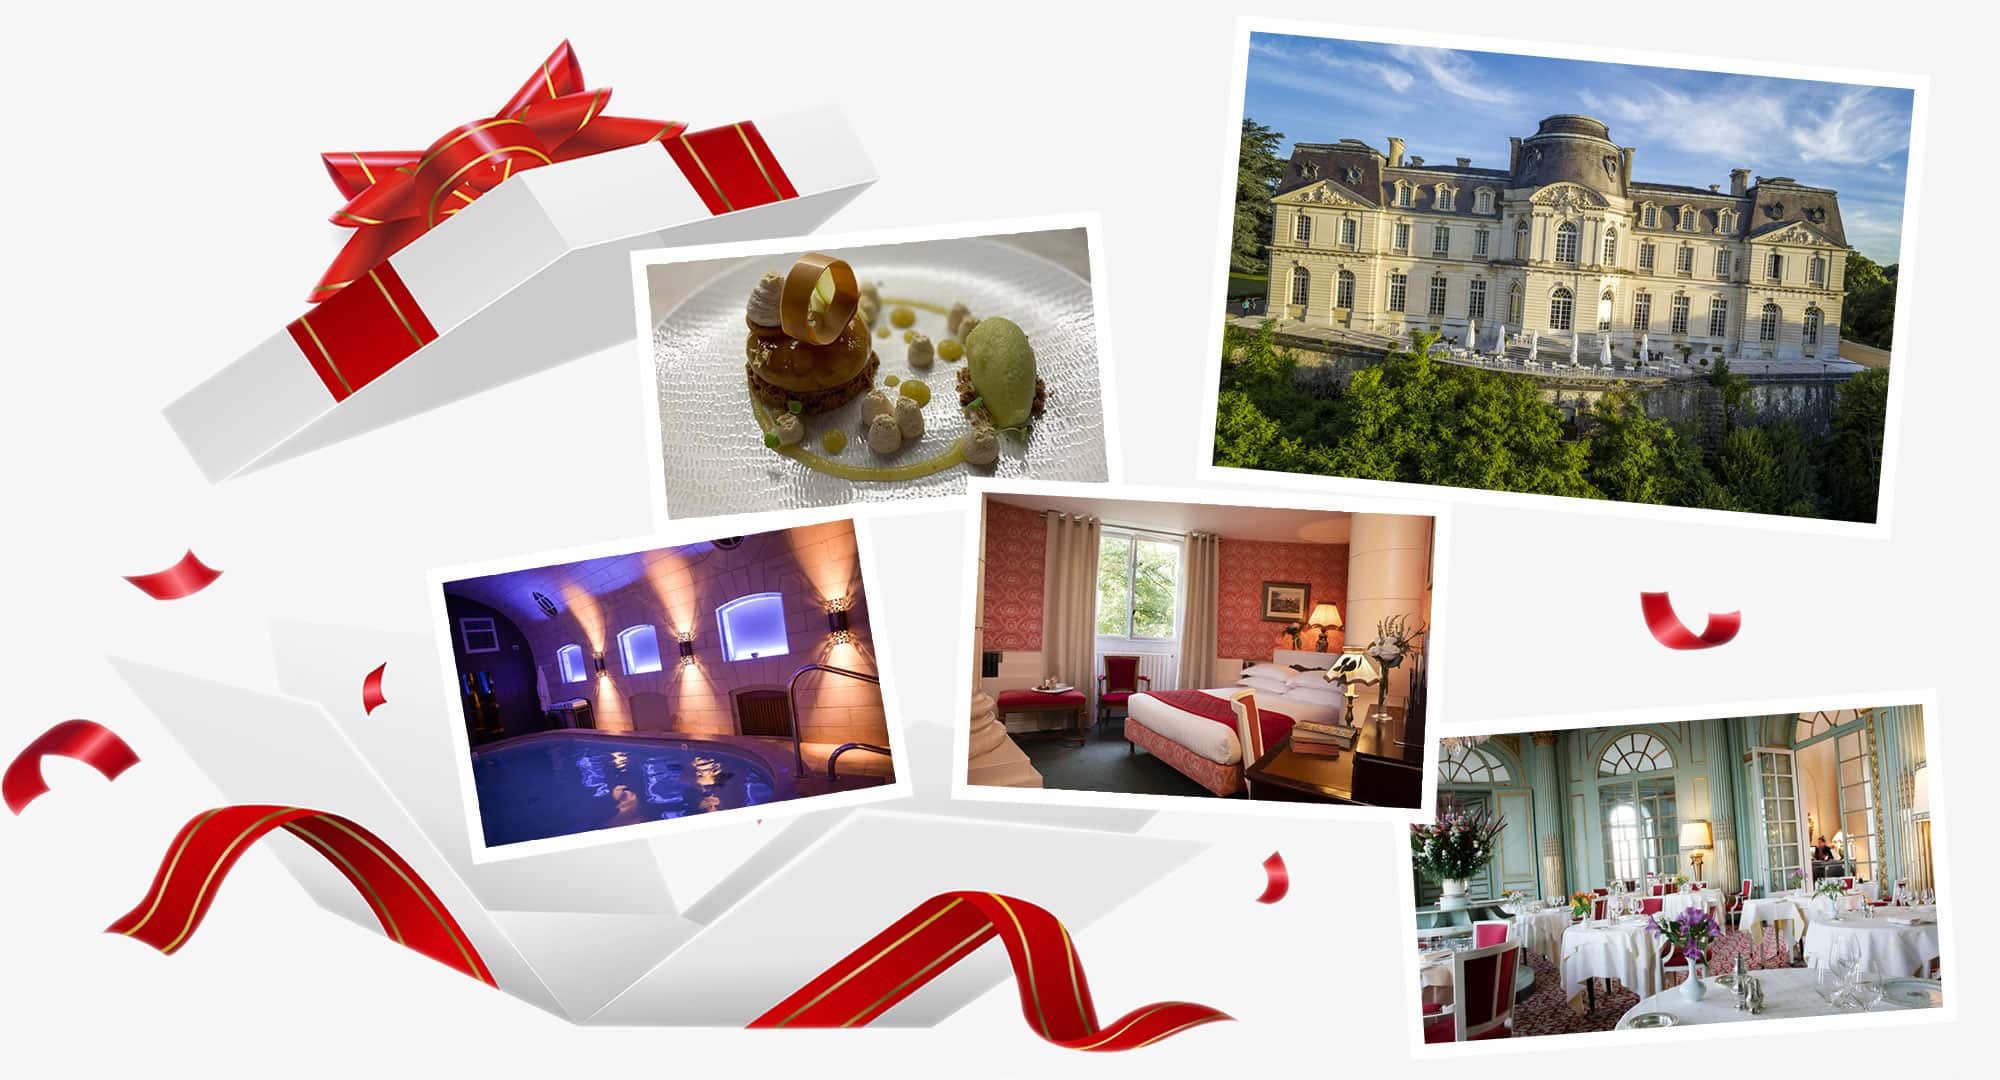 Gift ideas - Chateaux hotels